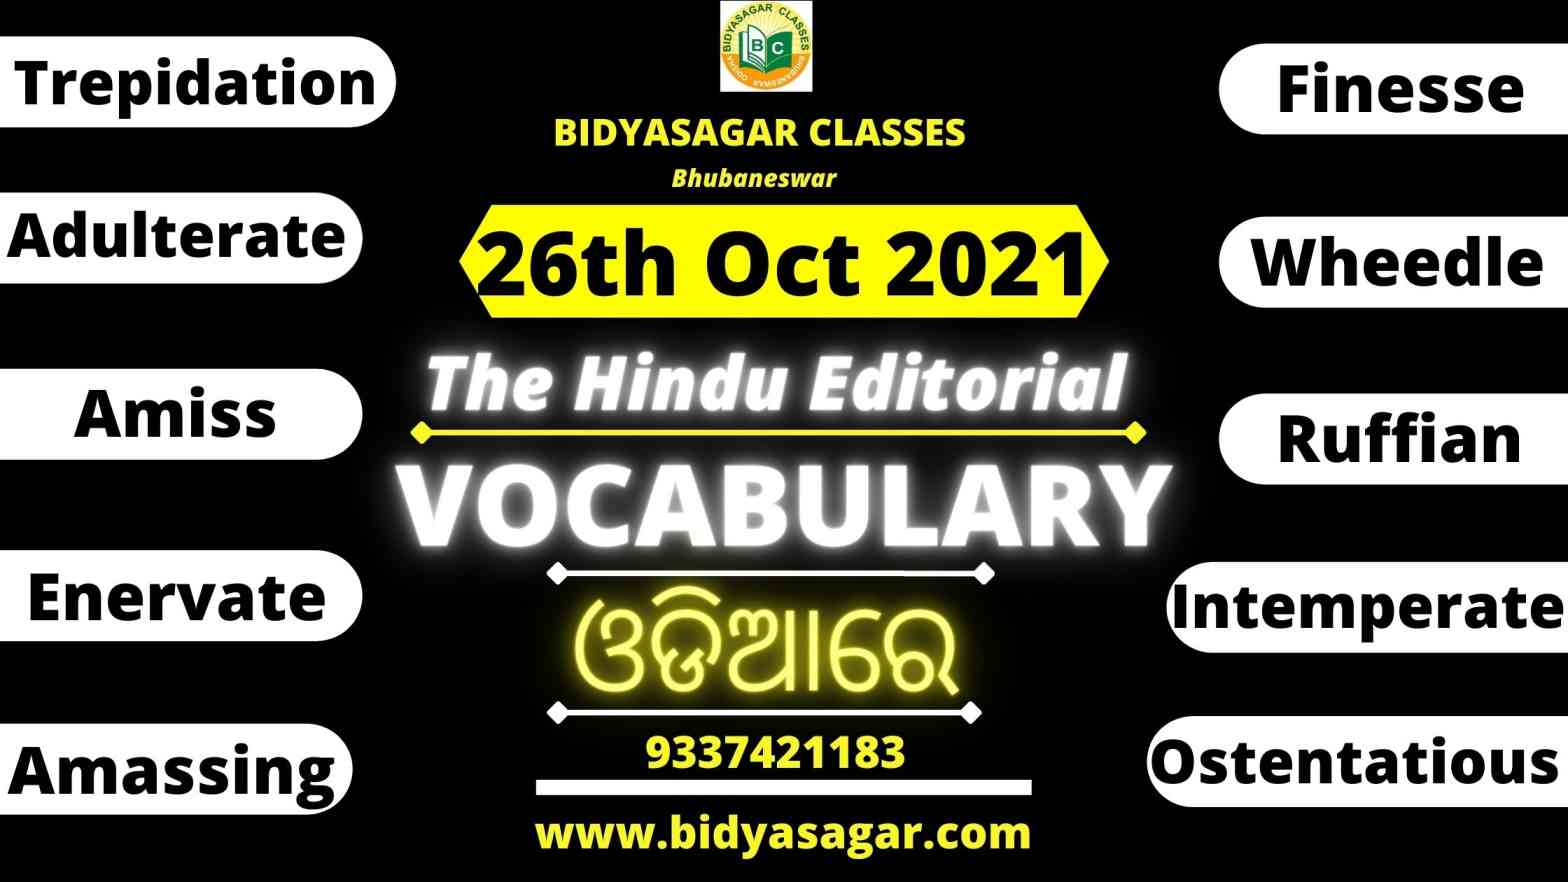 The Hindu Editorial Vocabulary of 26th October 2021